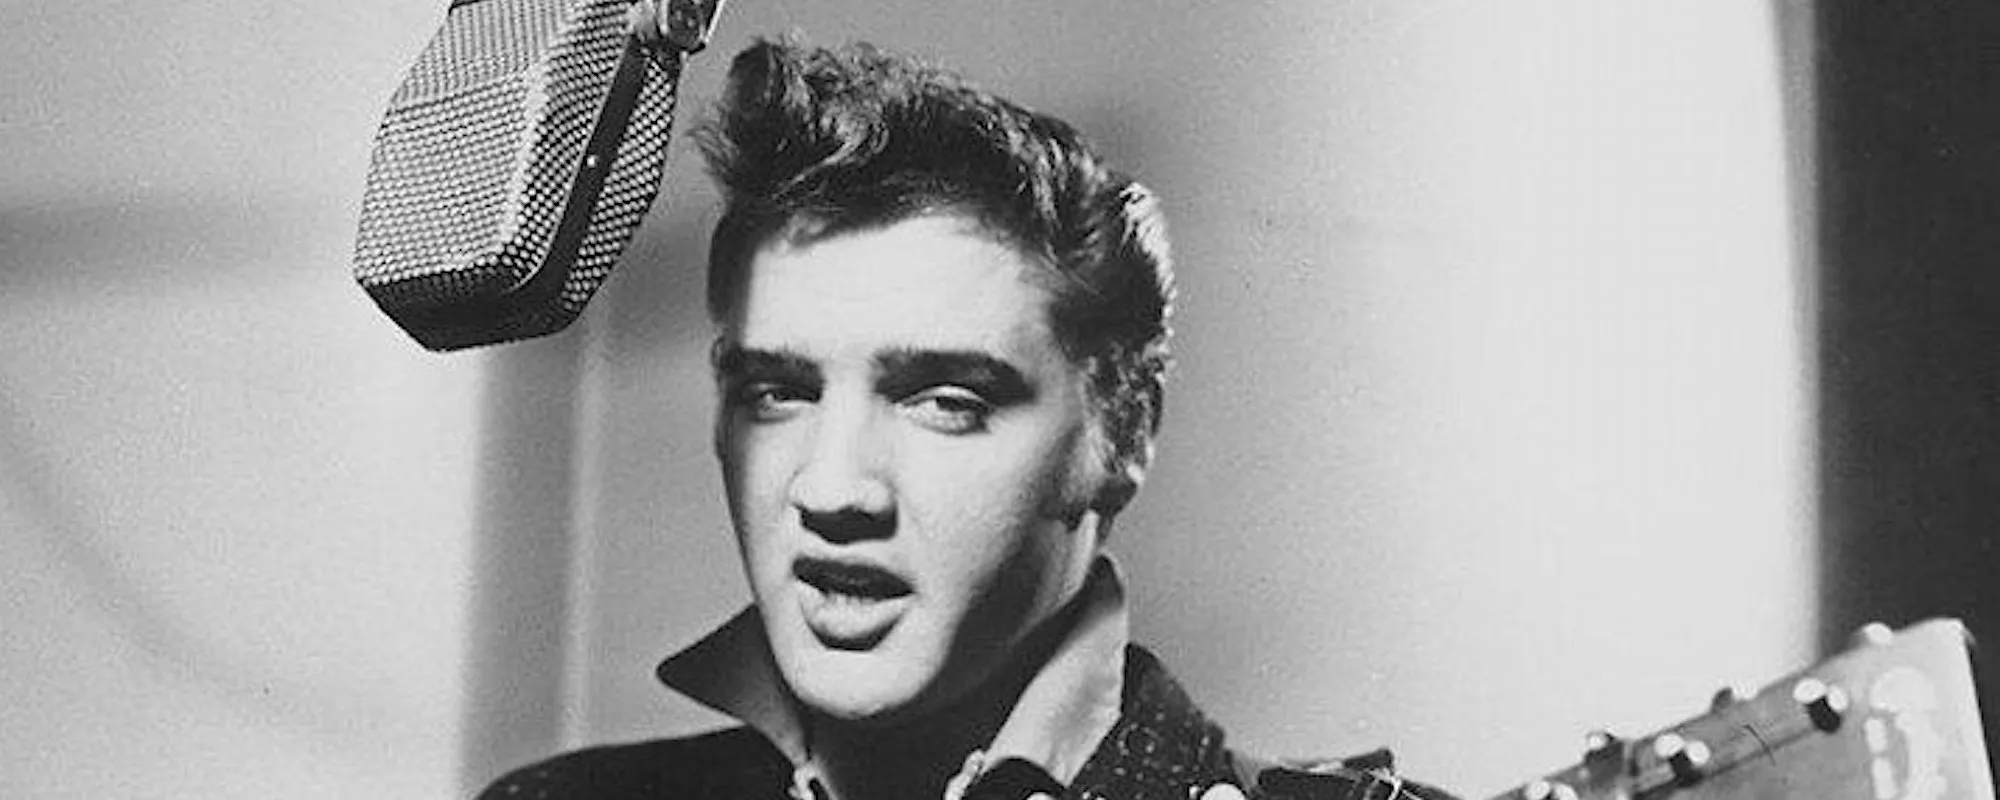 Elvis Presley’s Step-Brother Shares New Memoir, ‘The Faith of Elvis: A Story Only A Brother Can Tell’